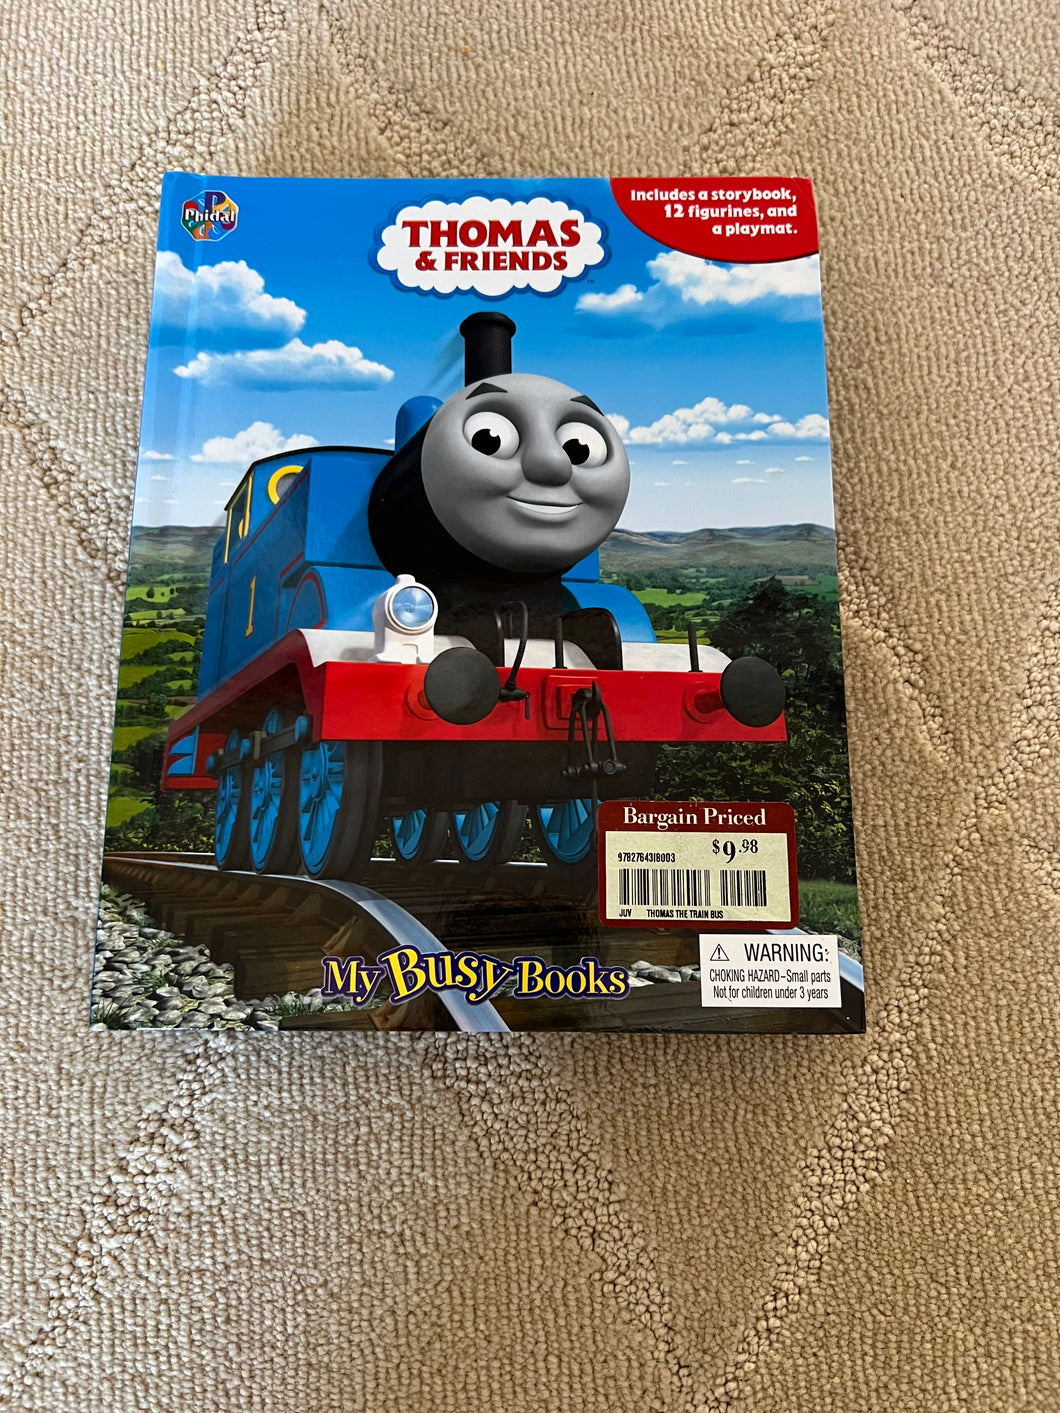 Thomas the train book with figures